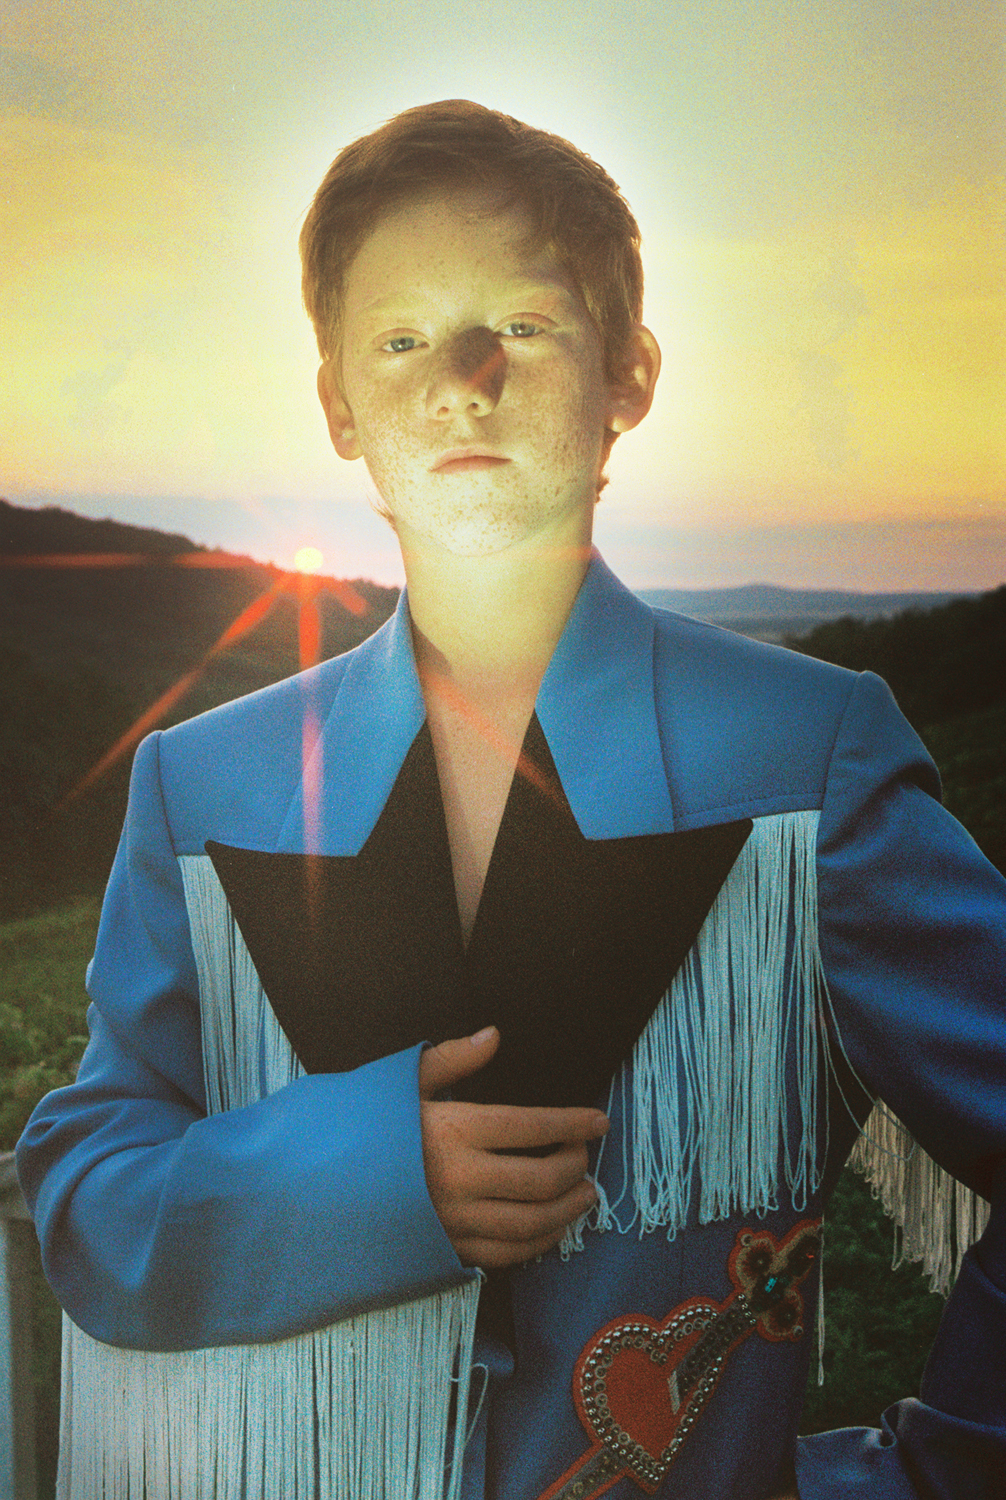     Petra Collins, Little Prince (Palko), 2016. Courtesy of the artist.

